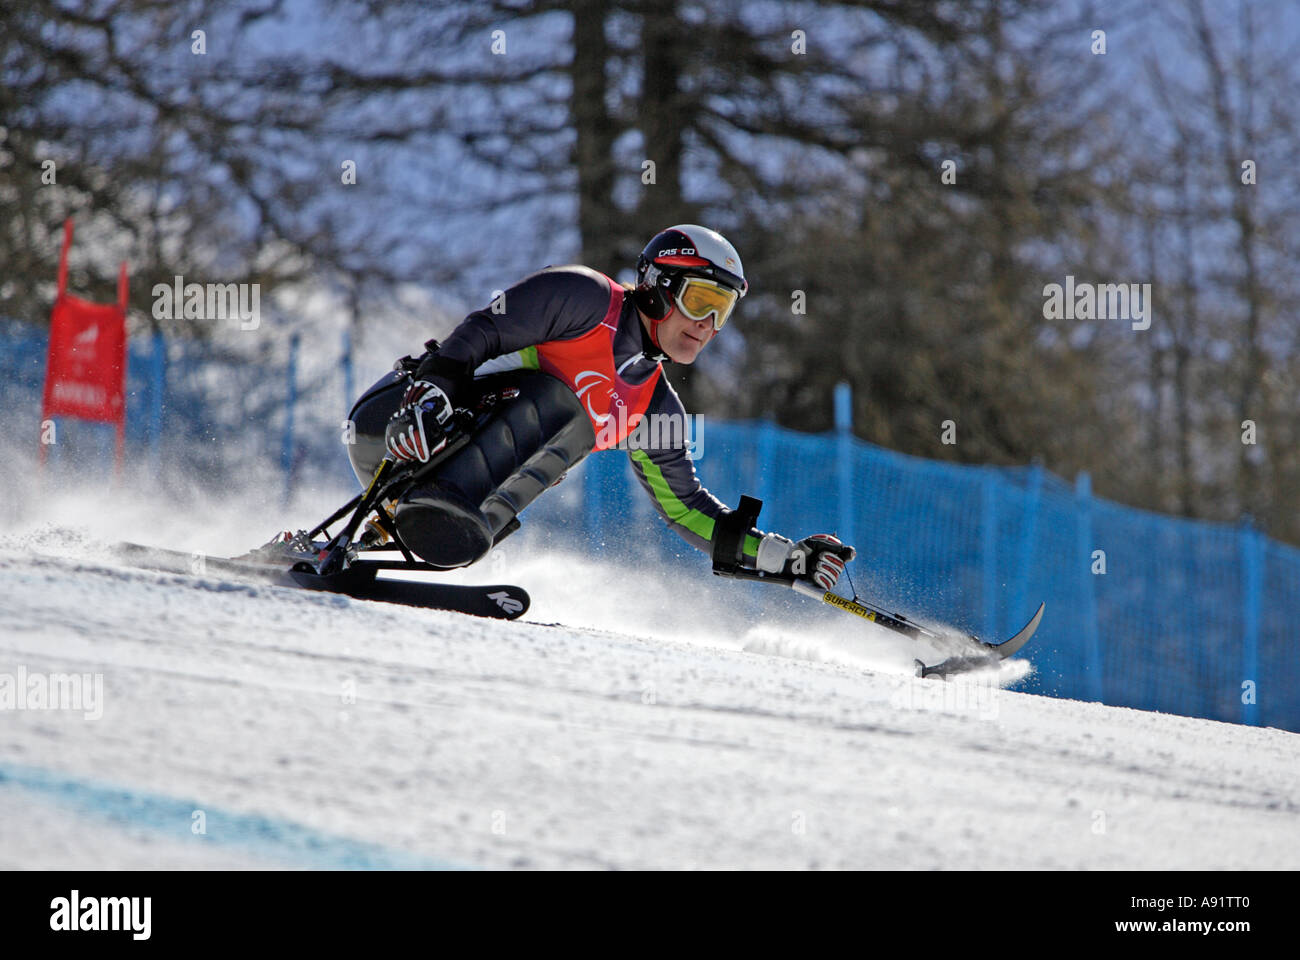 Martin Braxenthaler LW10 2 of Germany in the Mens Alpine Skiing Super G Sitting competition on his way to winning the gold medal Stock Photo